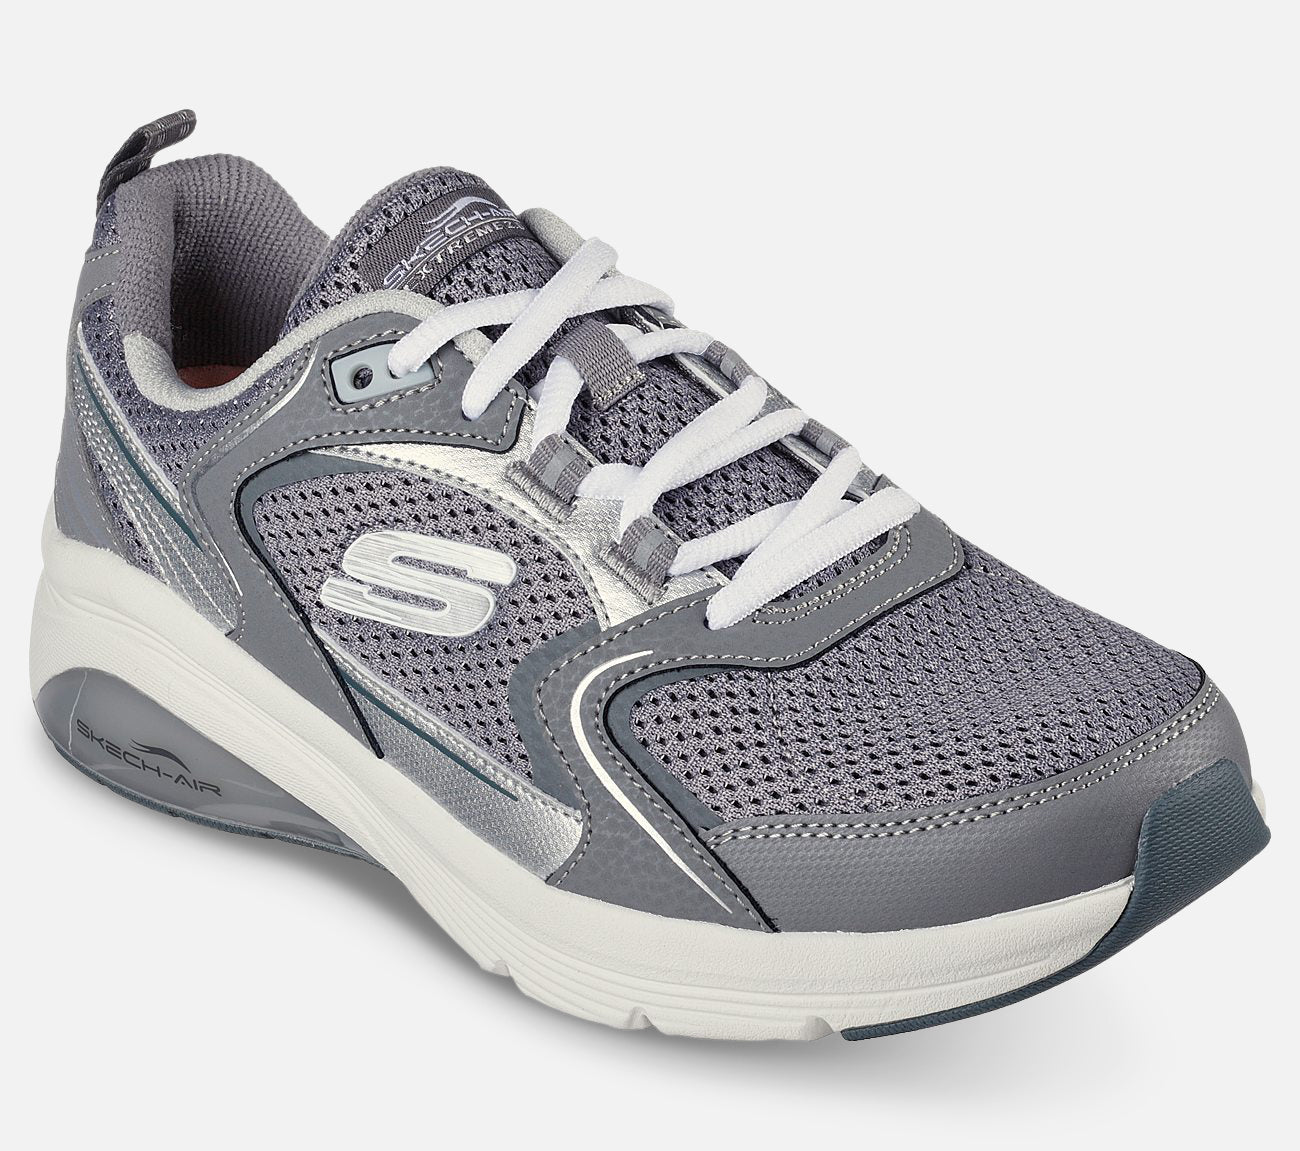 Skech-Air Extreme 2.0 - Daily Run Shoe Skechers